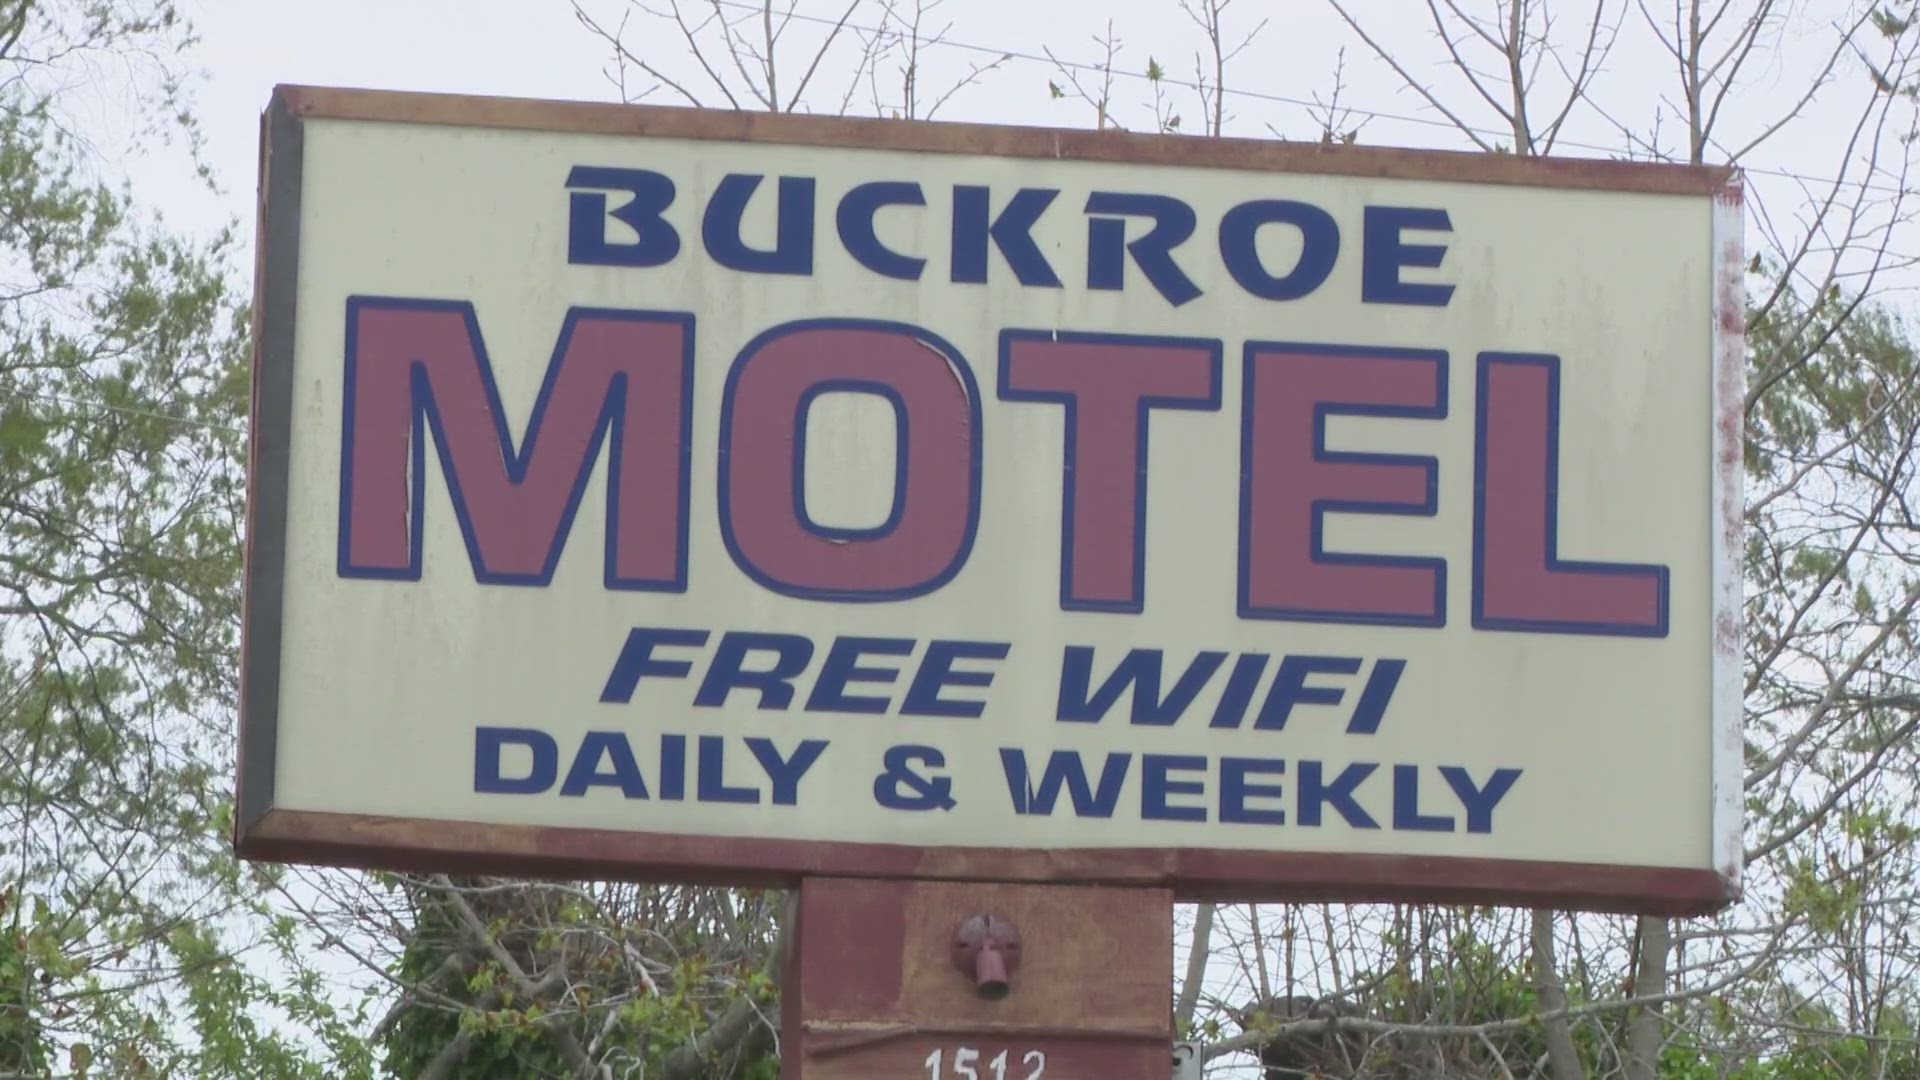 Almost half a dozen guests at the Buckroe Motel say they were informed they have 24 hours to get out!